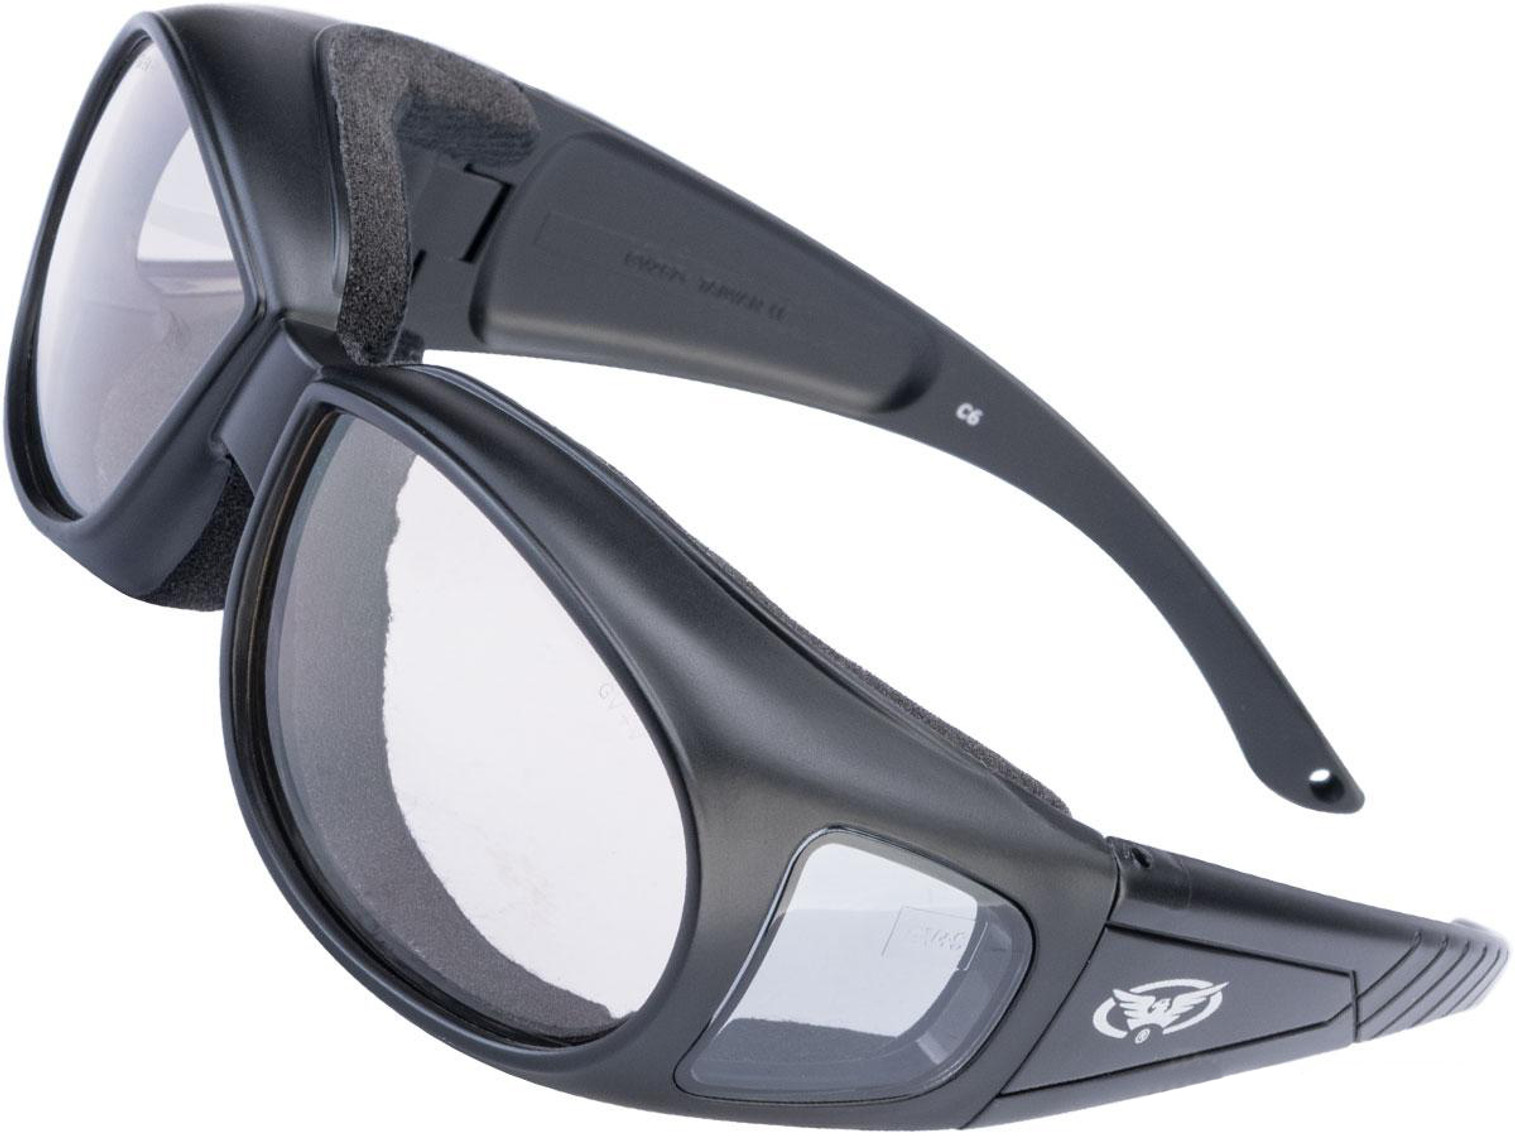 Global Vision Outfitter 24 "Over the Glasses" Safety Goggles w/ Photochromatic Anti-Fog Lenses